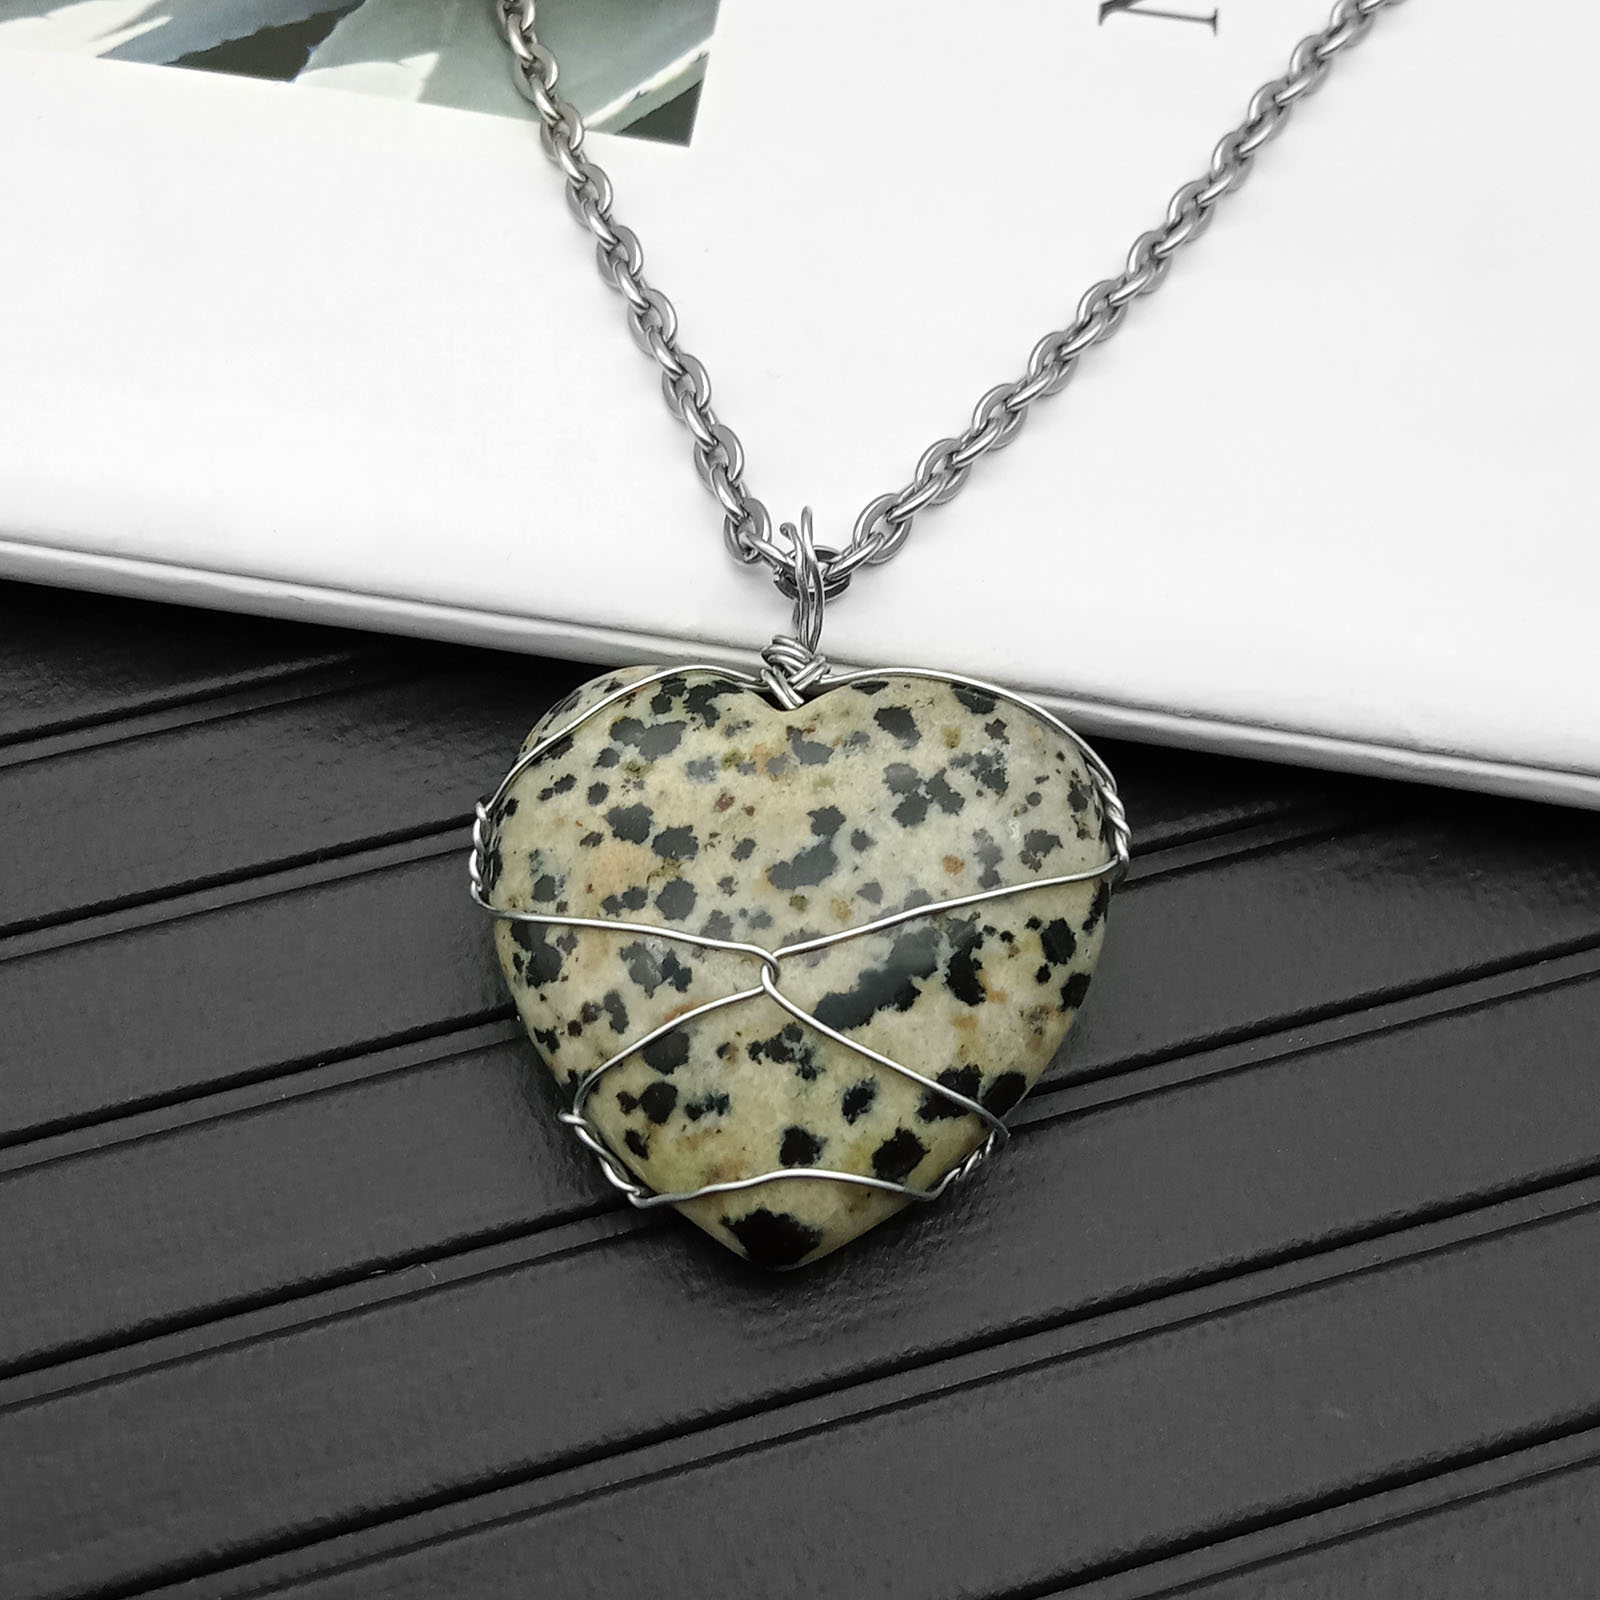 3:Speckled stone